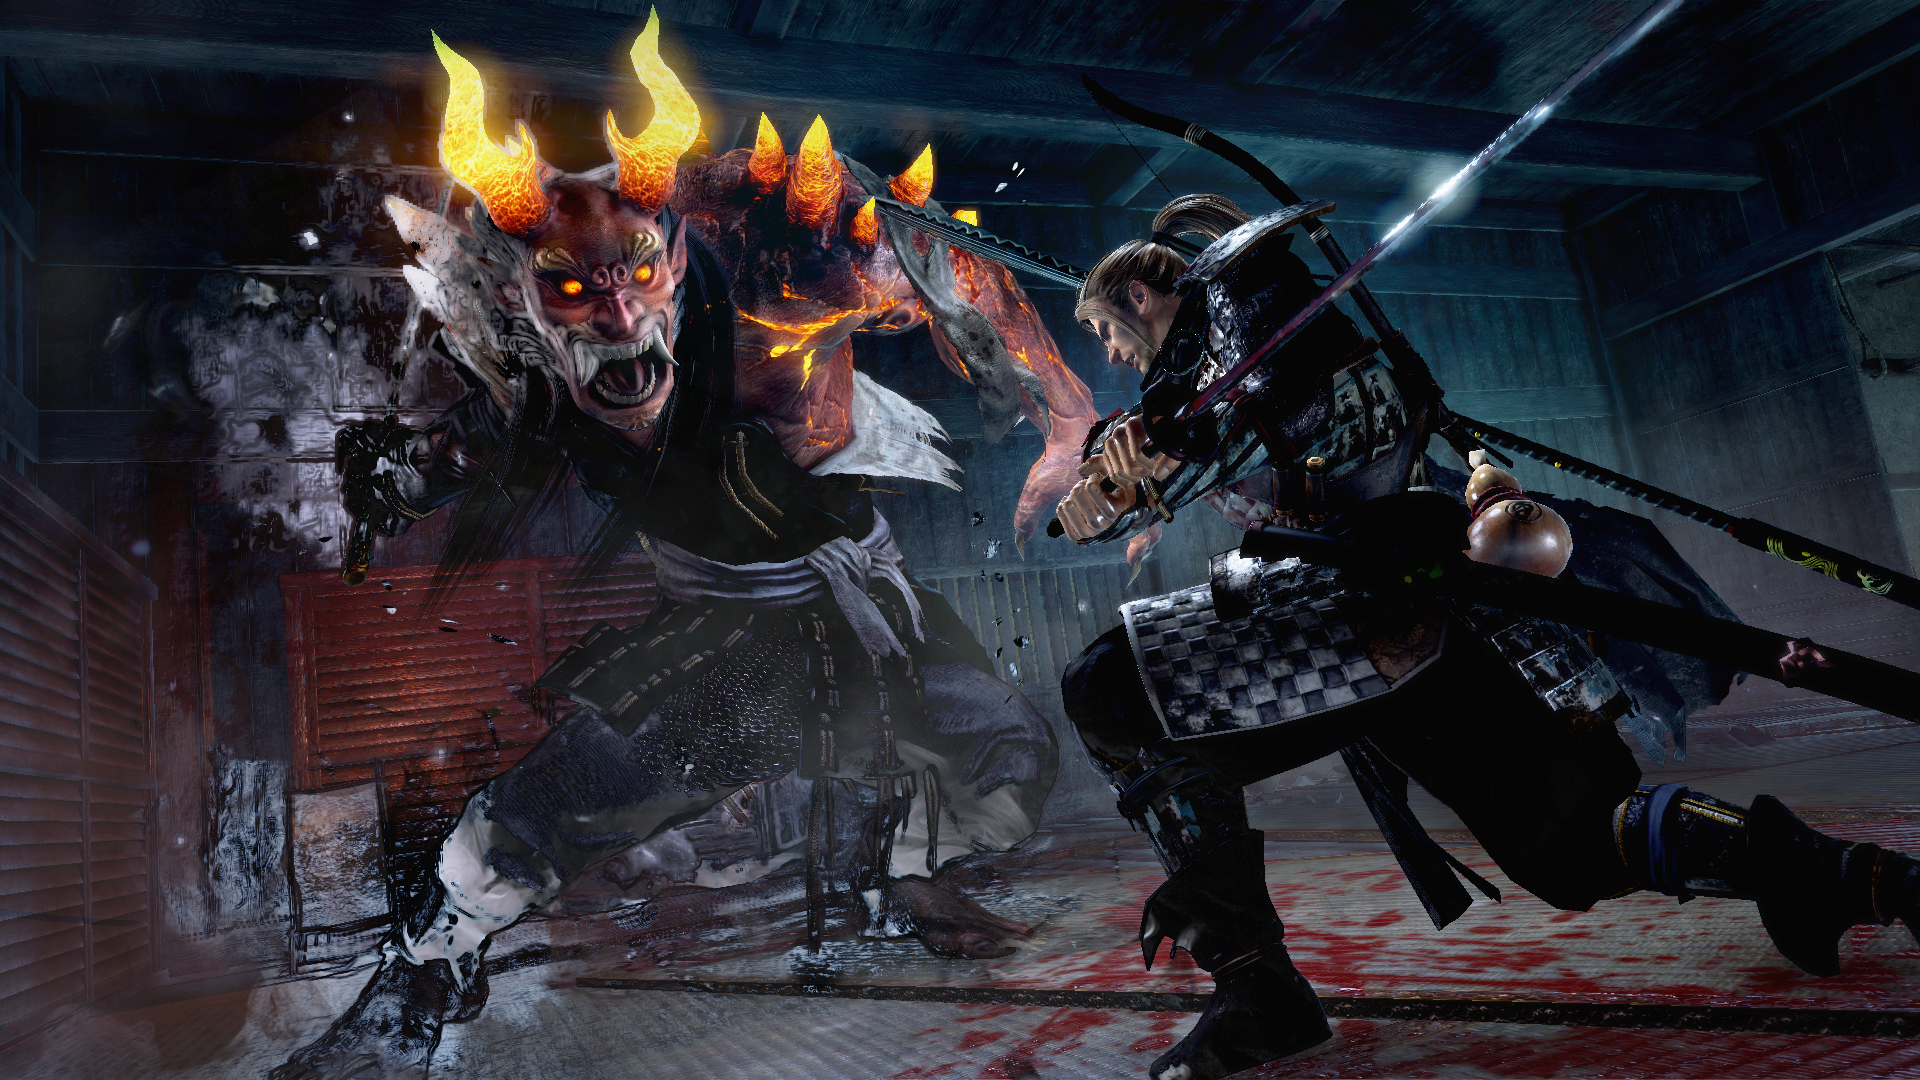 Behind Closed Doors Gameplay for Nioh Revealed